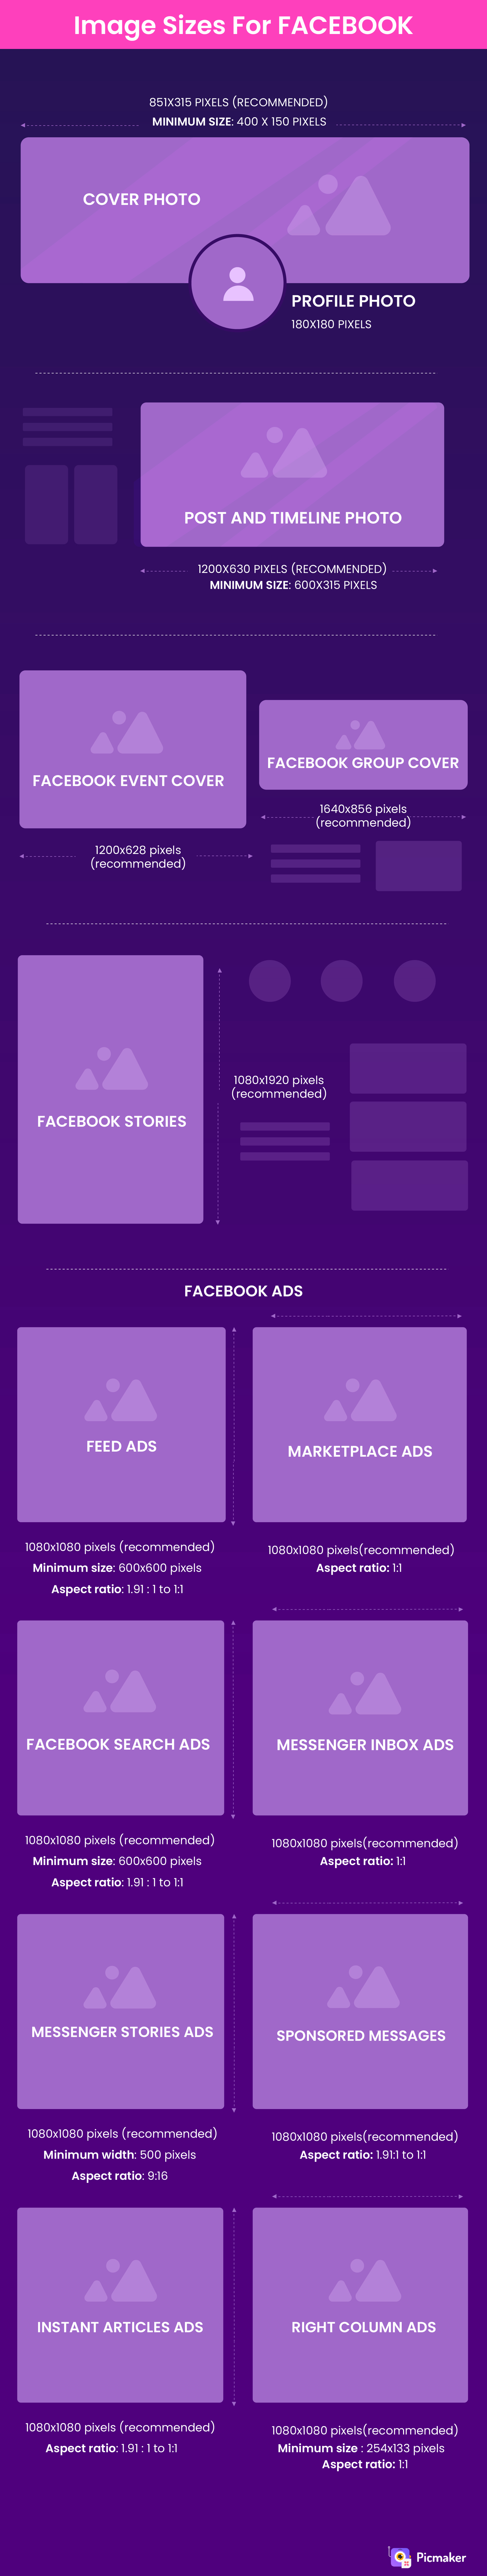 Facebook Image Sizes infographic